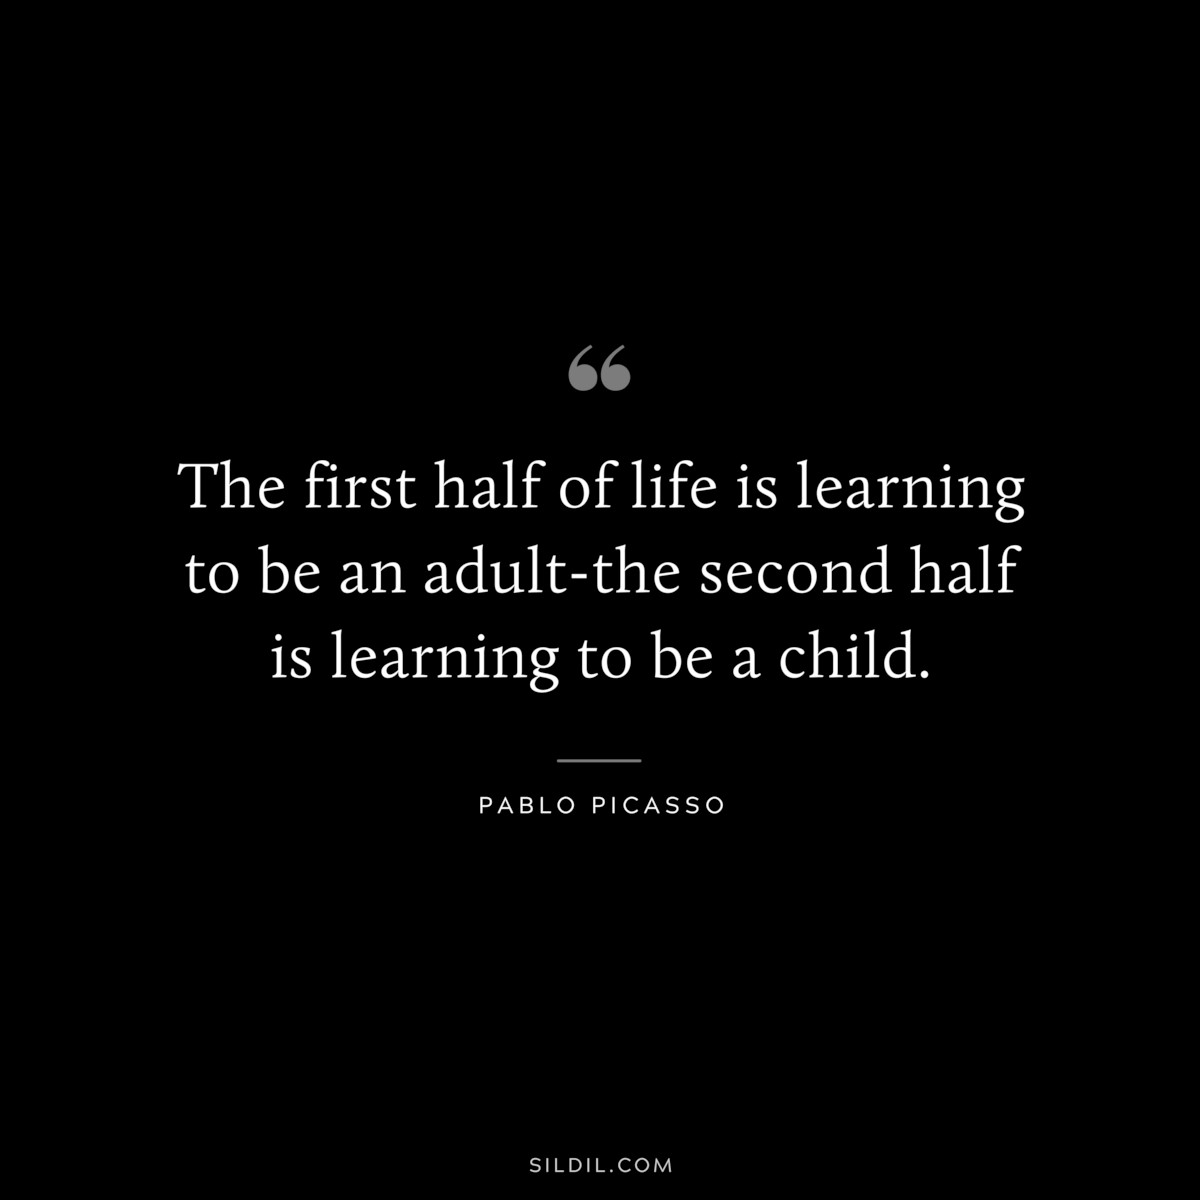 The first half of life is learning to be an adult-the second half is learning to be a child. ― Pablo Picasso